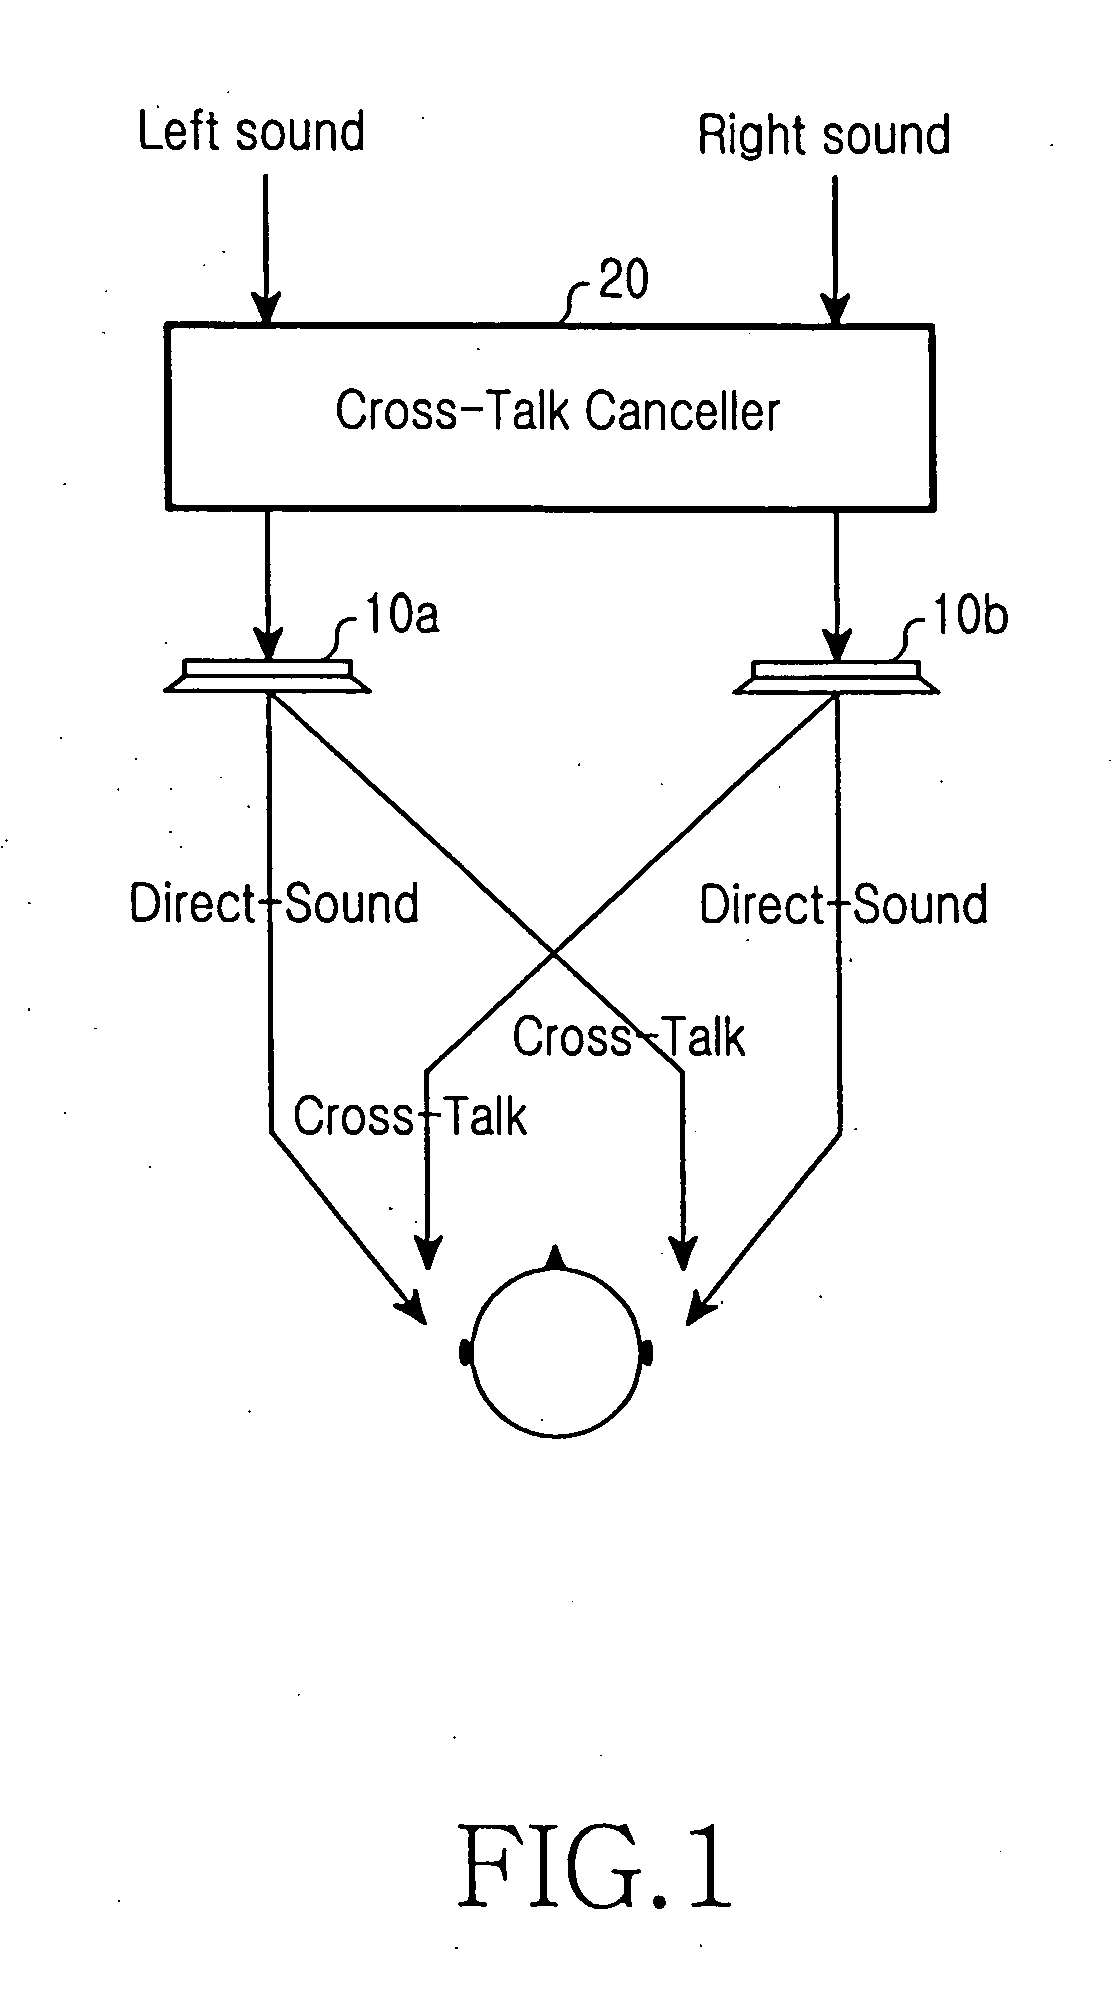 Apparatus and method for cross-talk cancellation in a mobile device